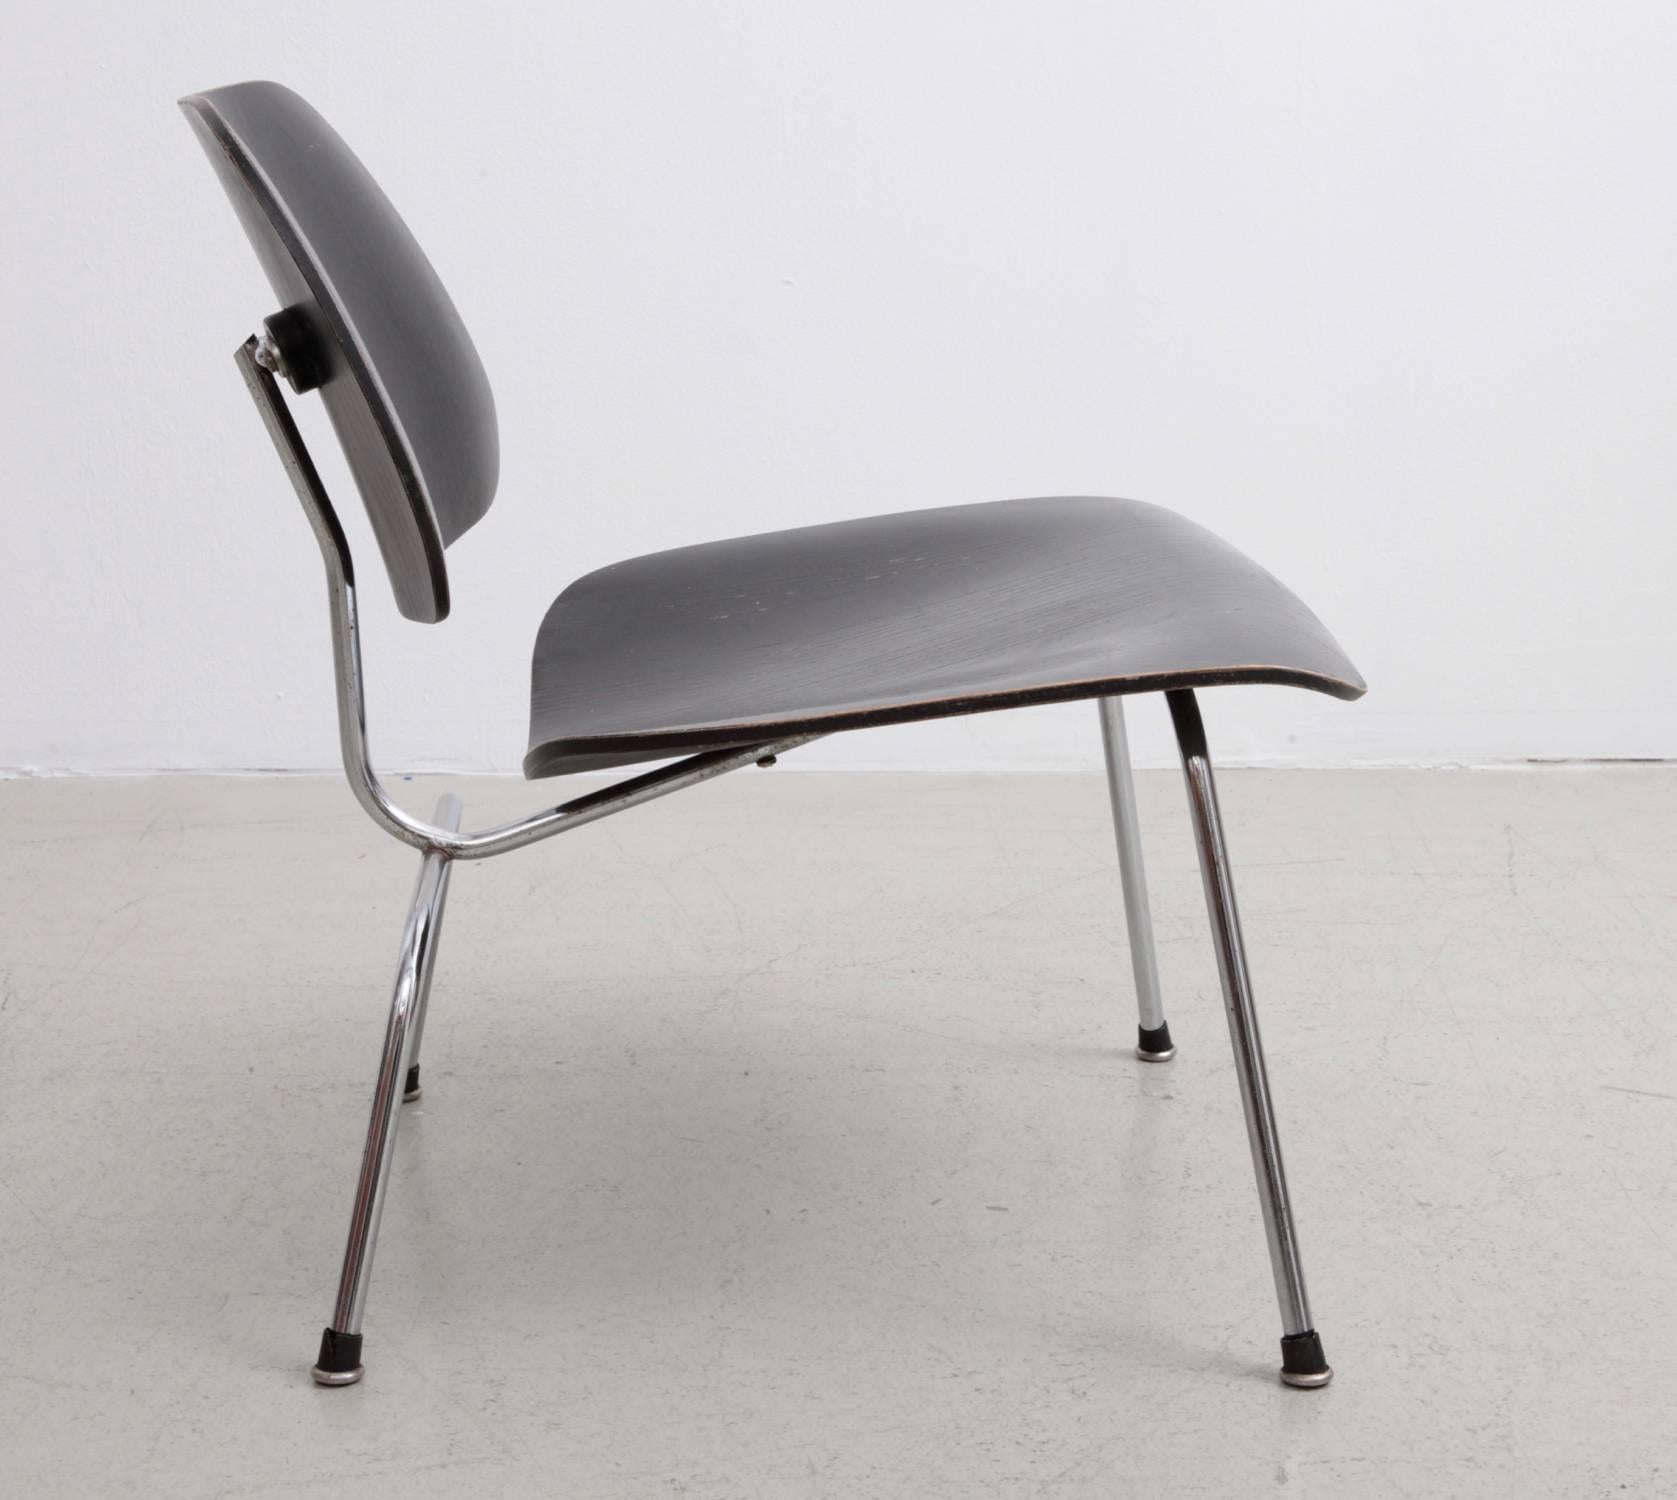 German Pair of Early LCM Lounge Chairs by Charles Eames for Herman Miller